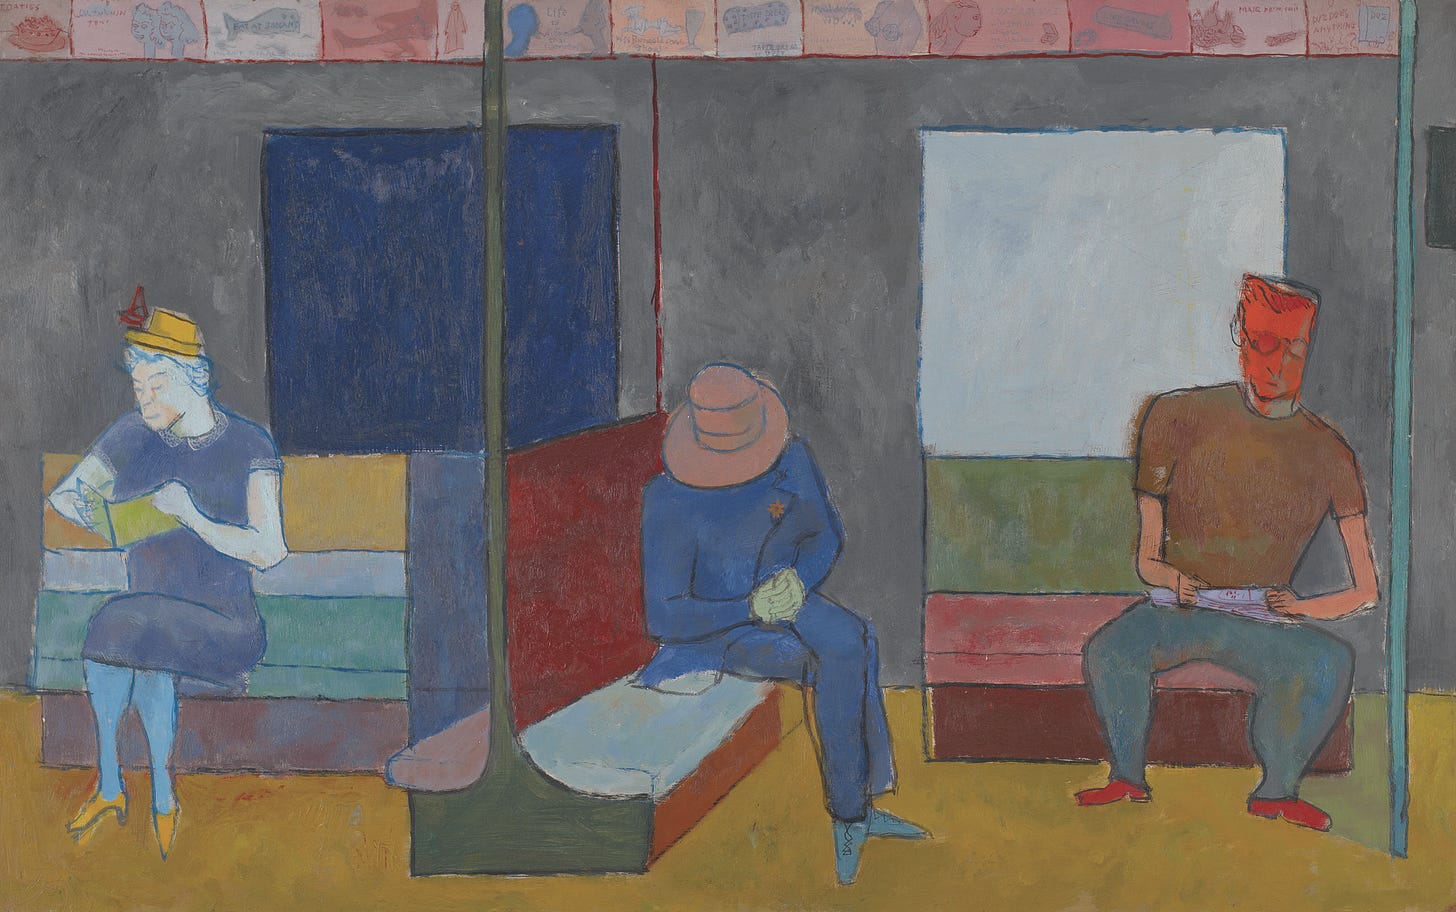 Description of Three Figures On a Subway, 1948 | The Guggenheim Museums and  Foundation